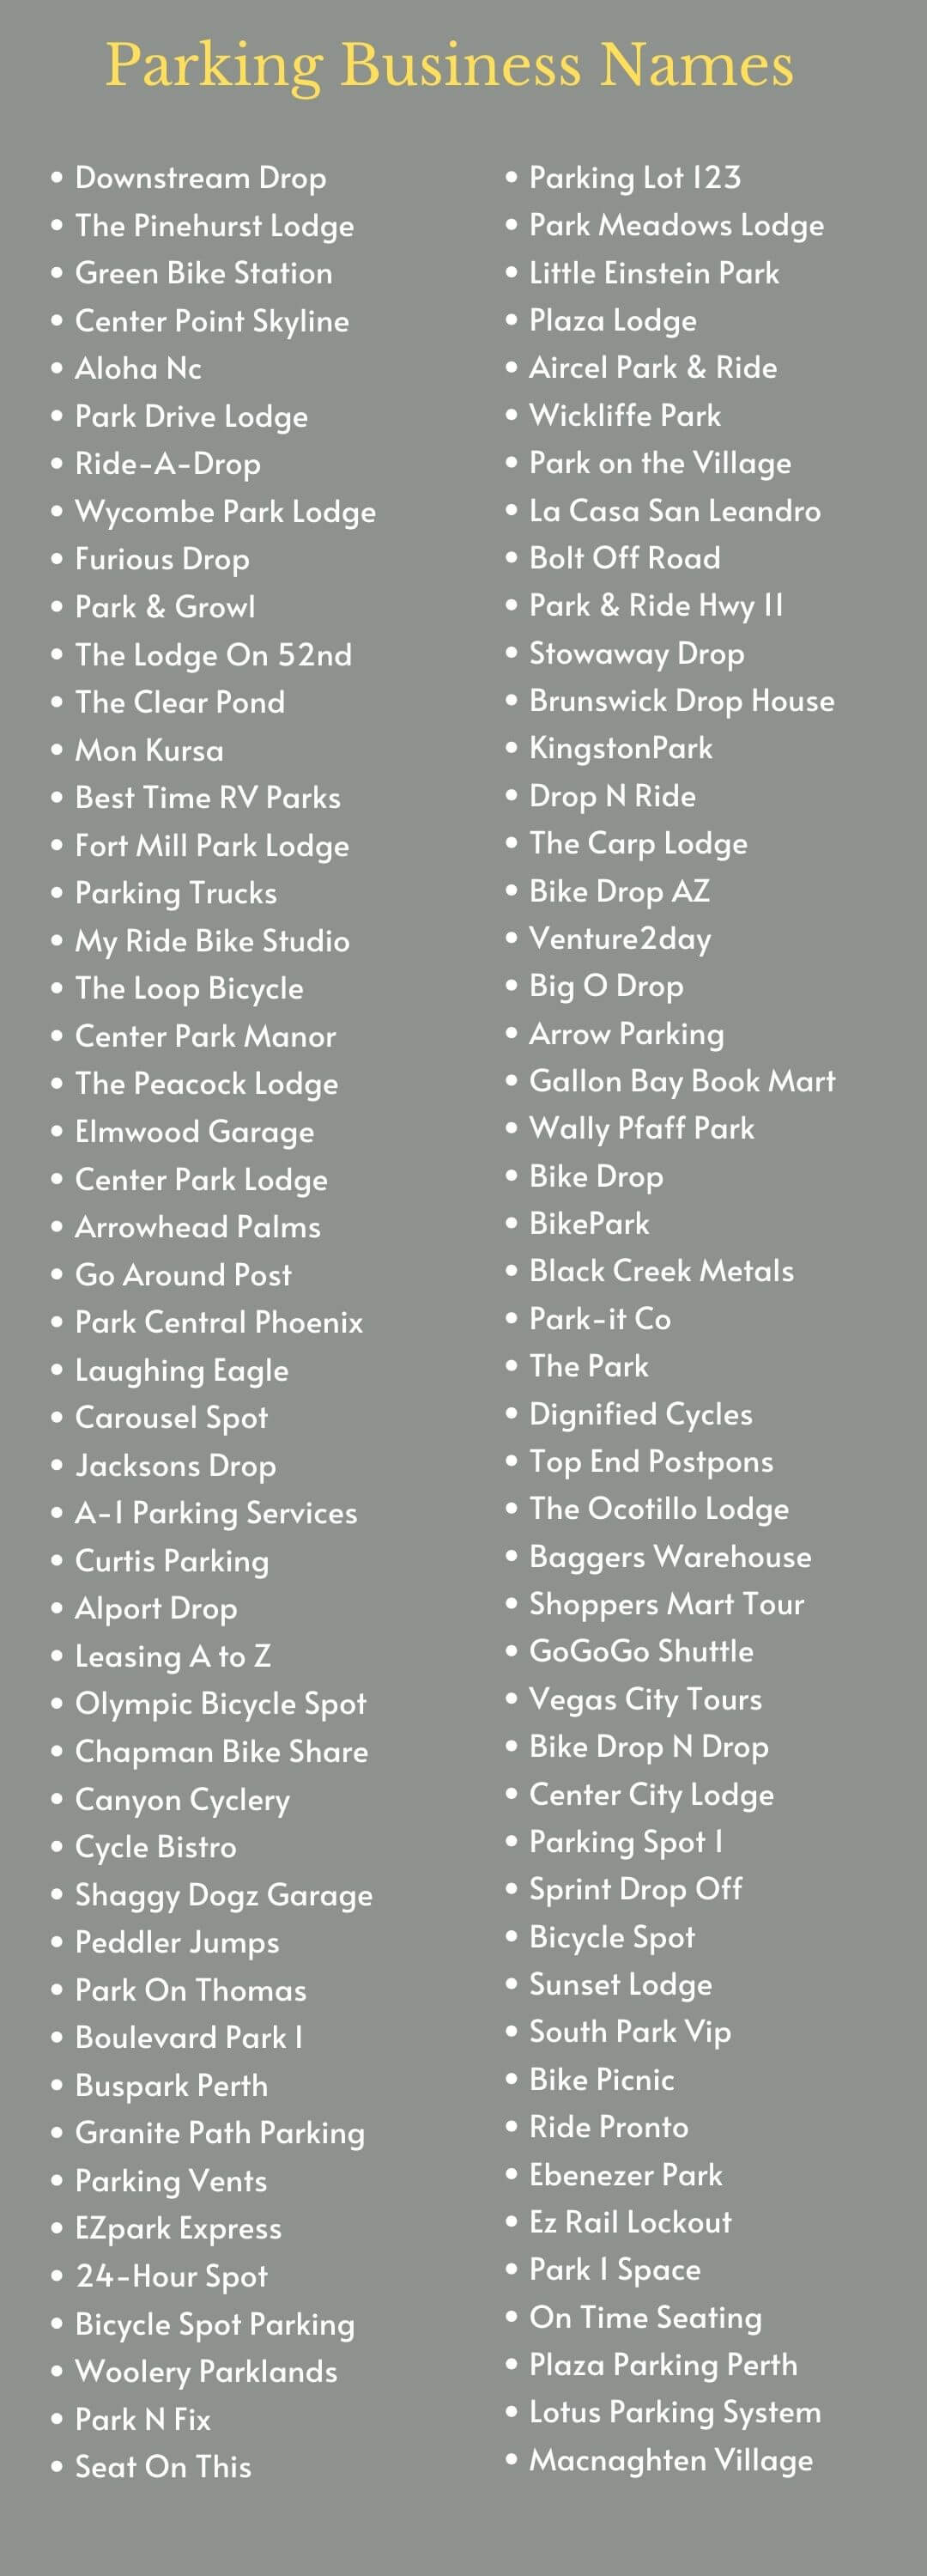 Parking Business Names